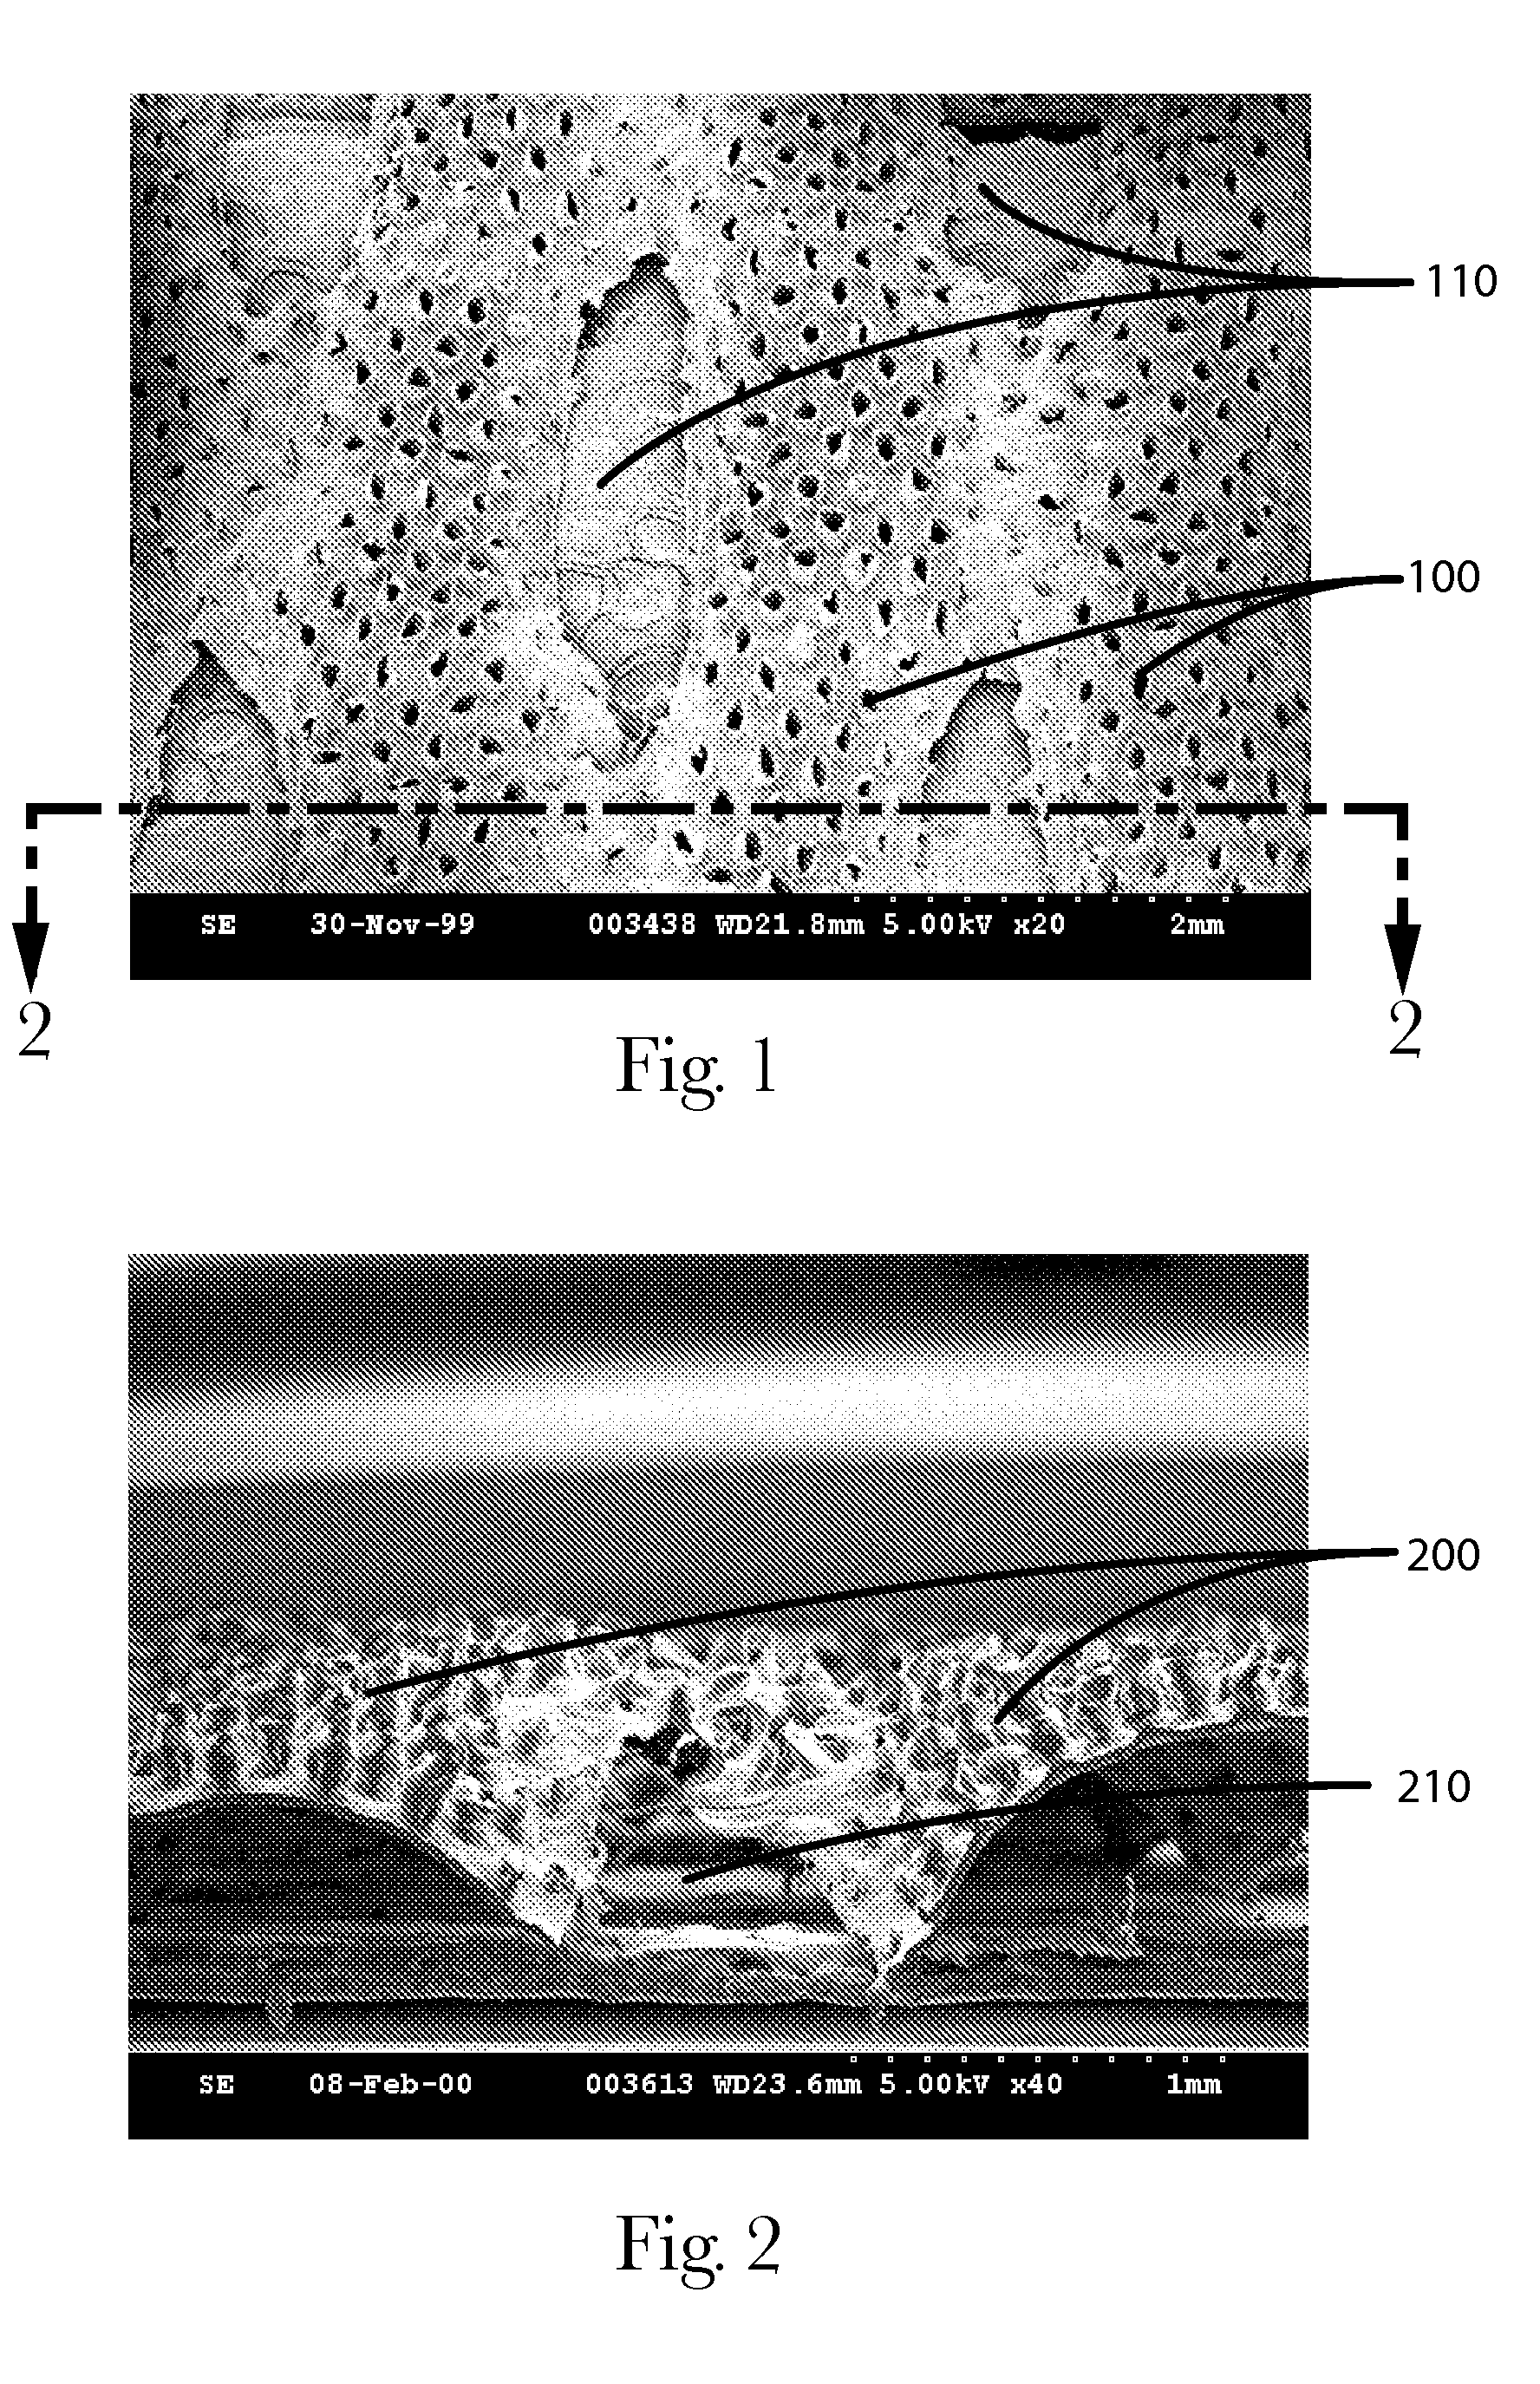 Apertured polymeric film webs and absorbent articles using such webs